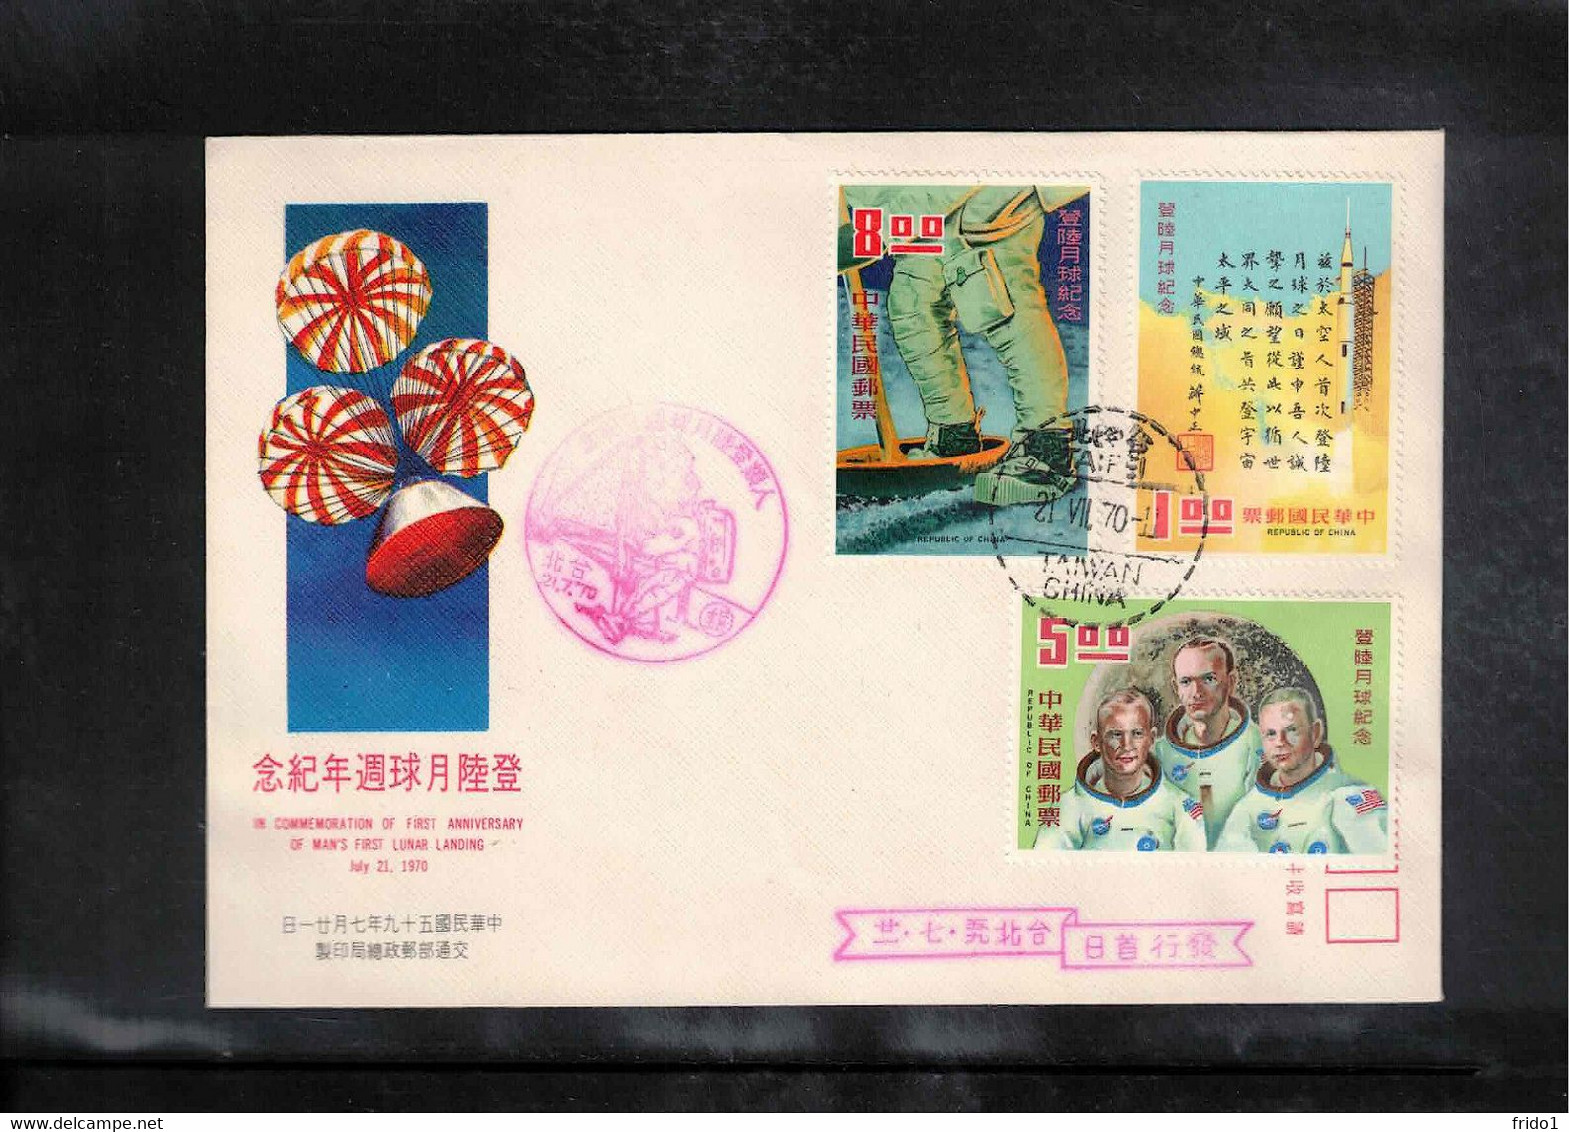 Taiwan 1970 Space / Raumfahrt 1st Anniversary Of The First Man On The Moon FDC - Asien